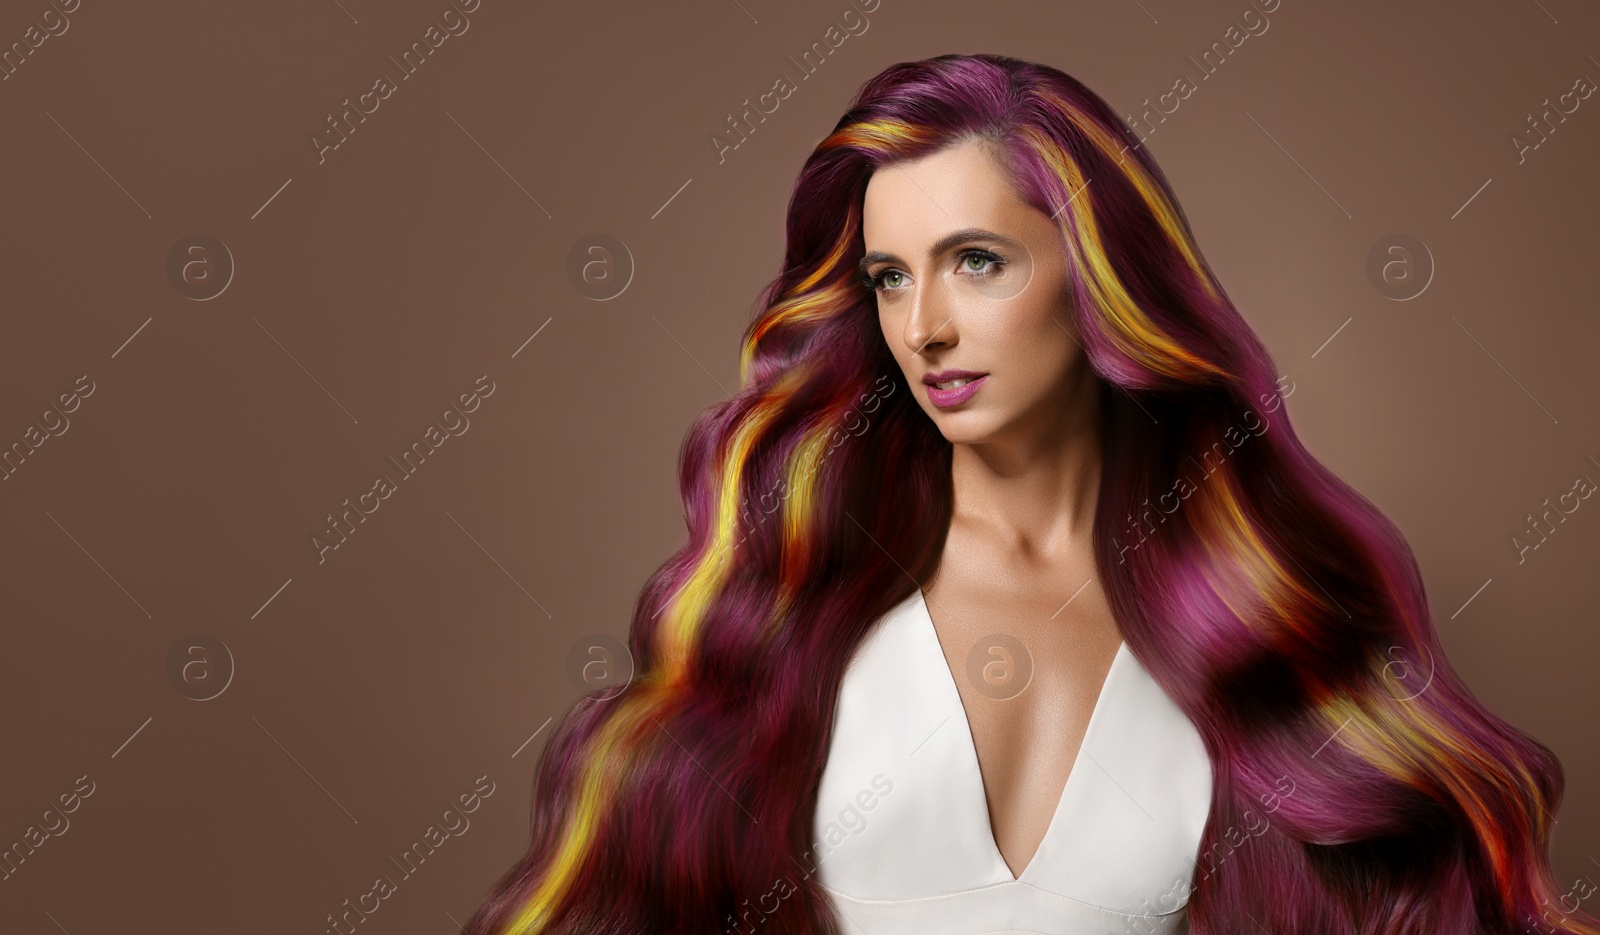 Image of Hair styling. Attractive woman with colorful hair on pale brown background. Banner design with space for text